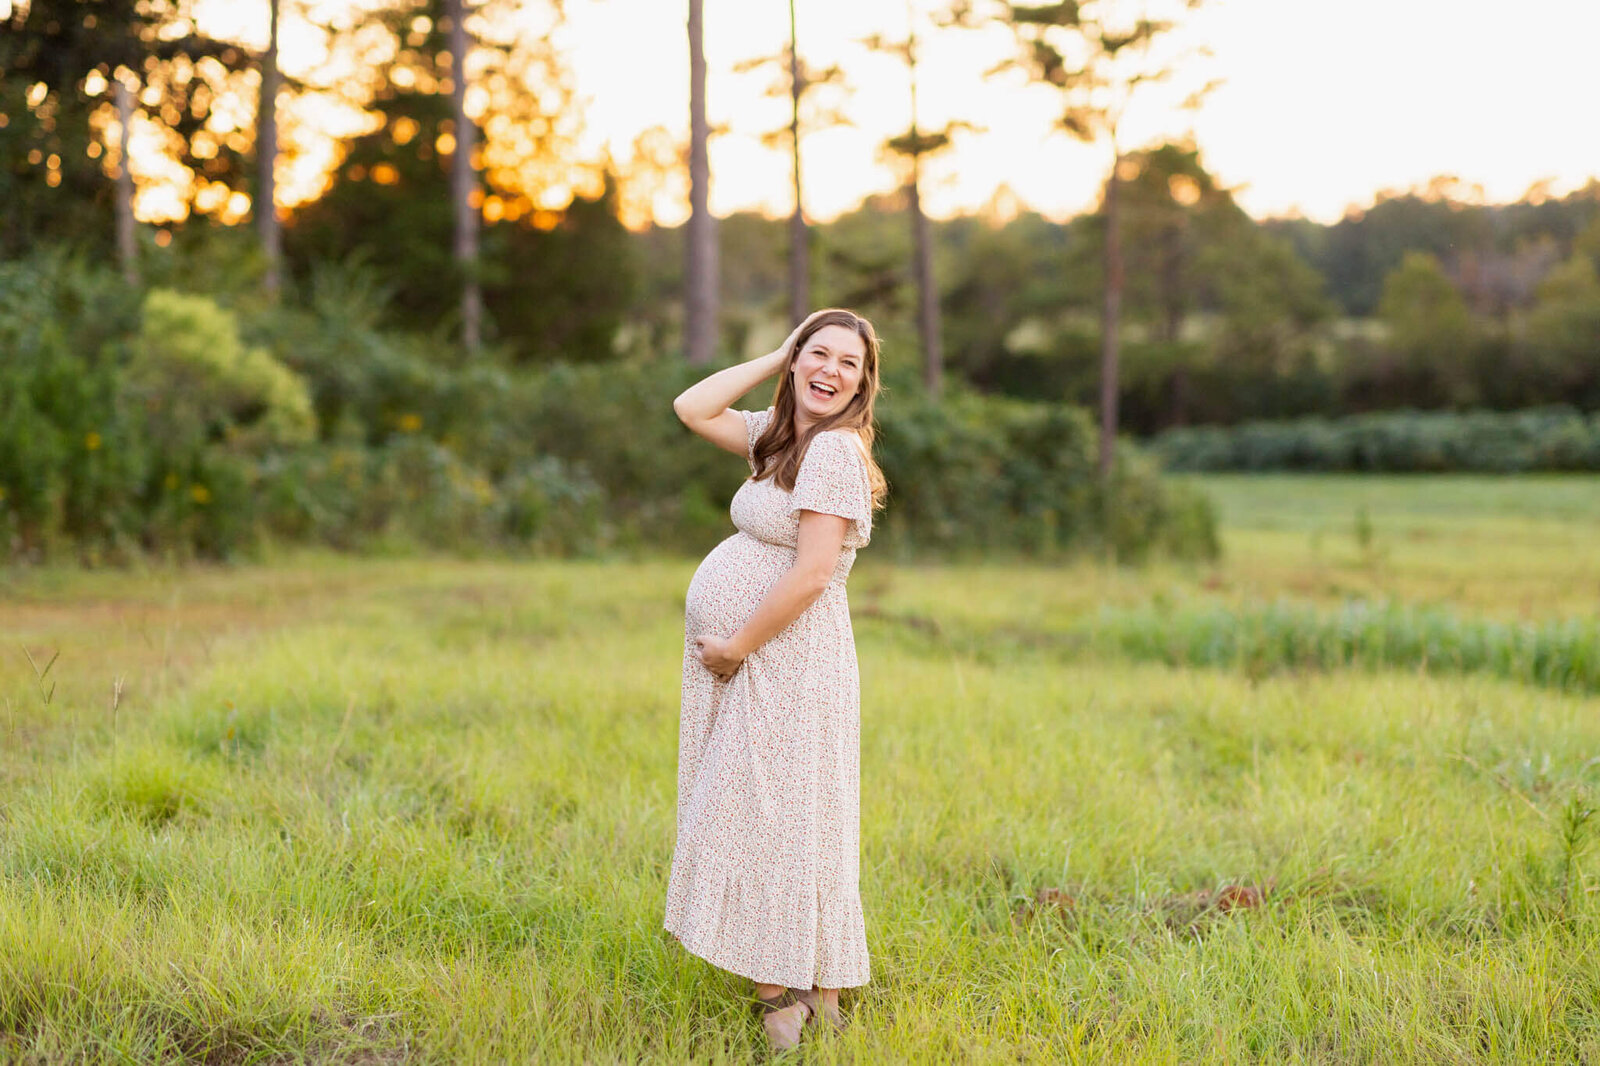 expectannt mother in a floral dress standing in a grassy field at golden hour